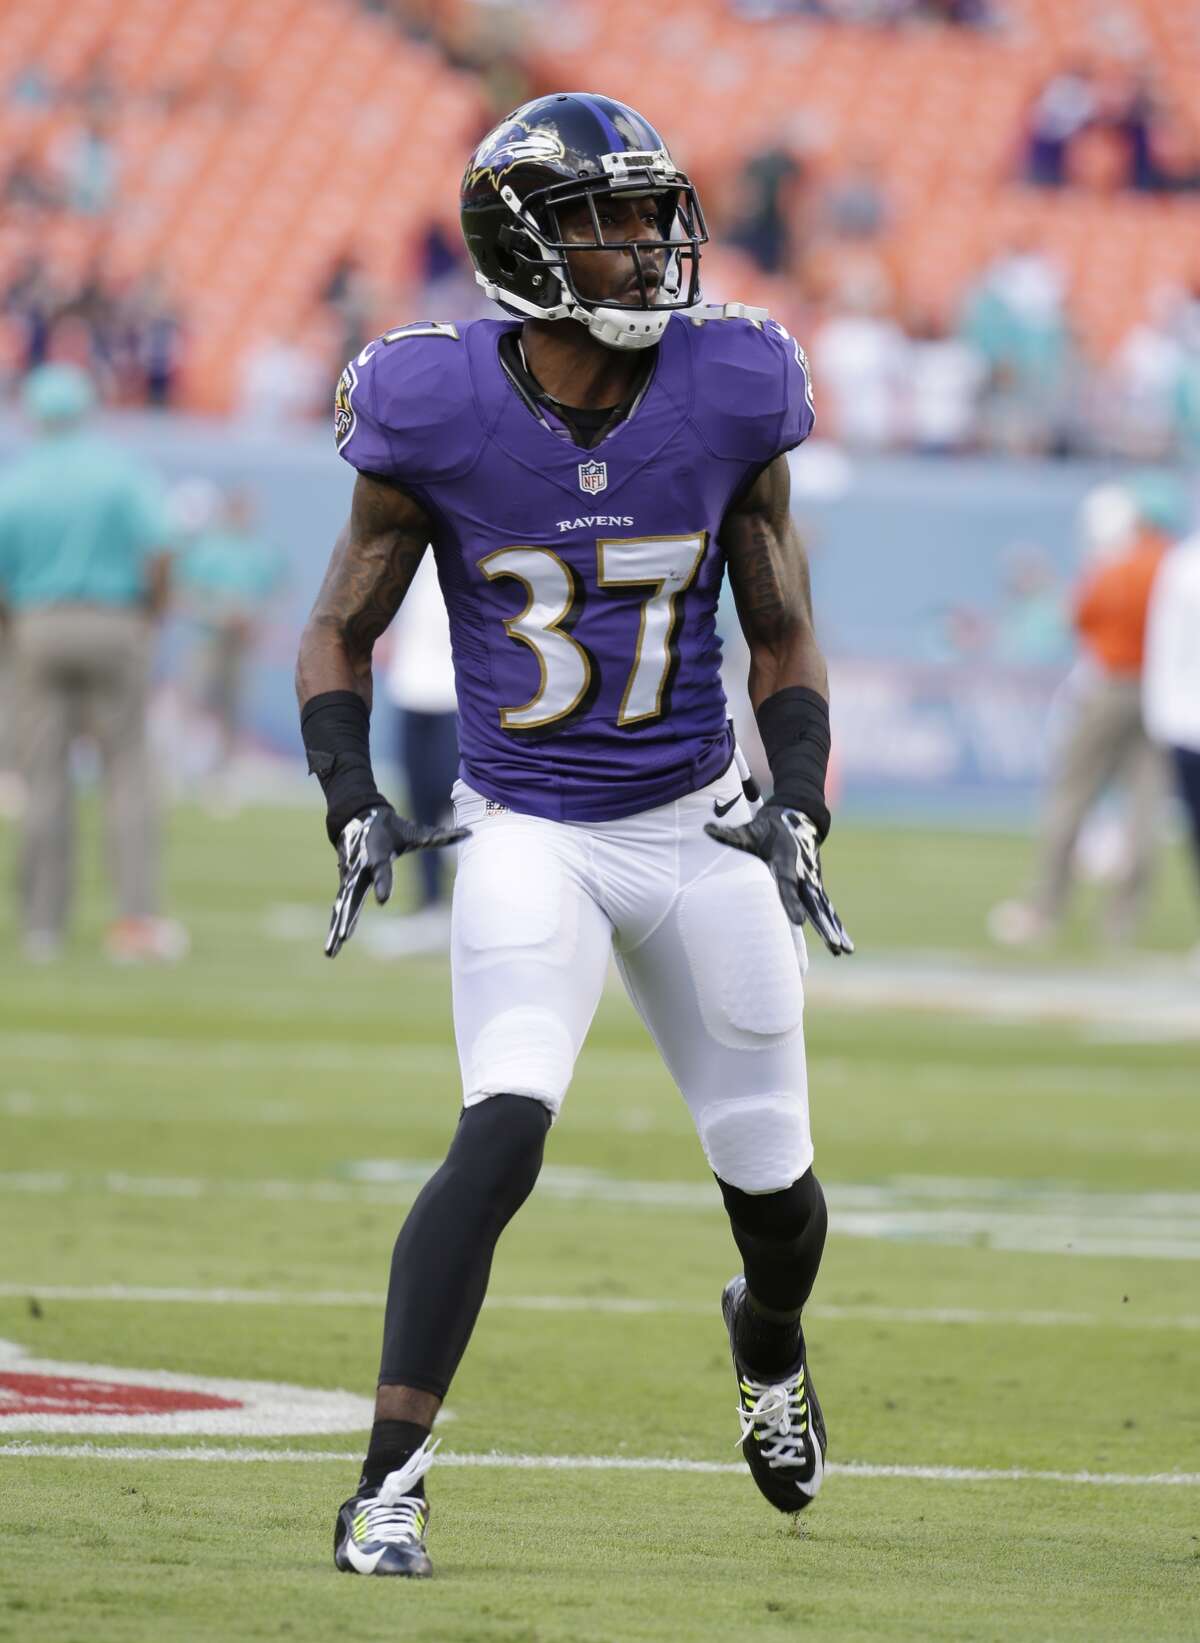 Baltimore Ravens defensive back Danny Gorrer (37) warms up before an NFL football game against the Miami Dolphins, Sunday, Dec. 7, 2014, in Miami Gardens, Fla. (AP Photo/Lynne Sladky)